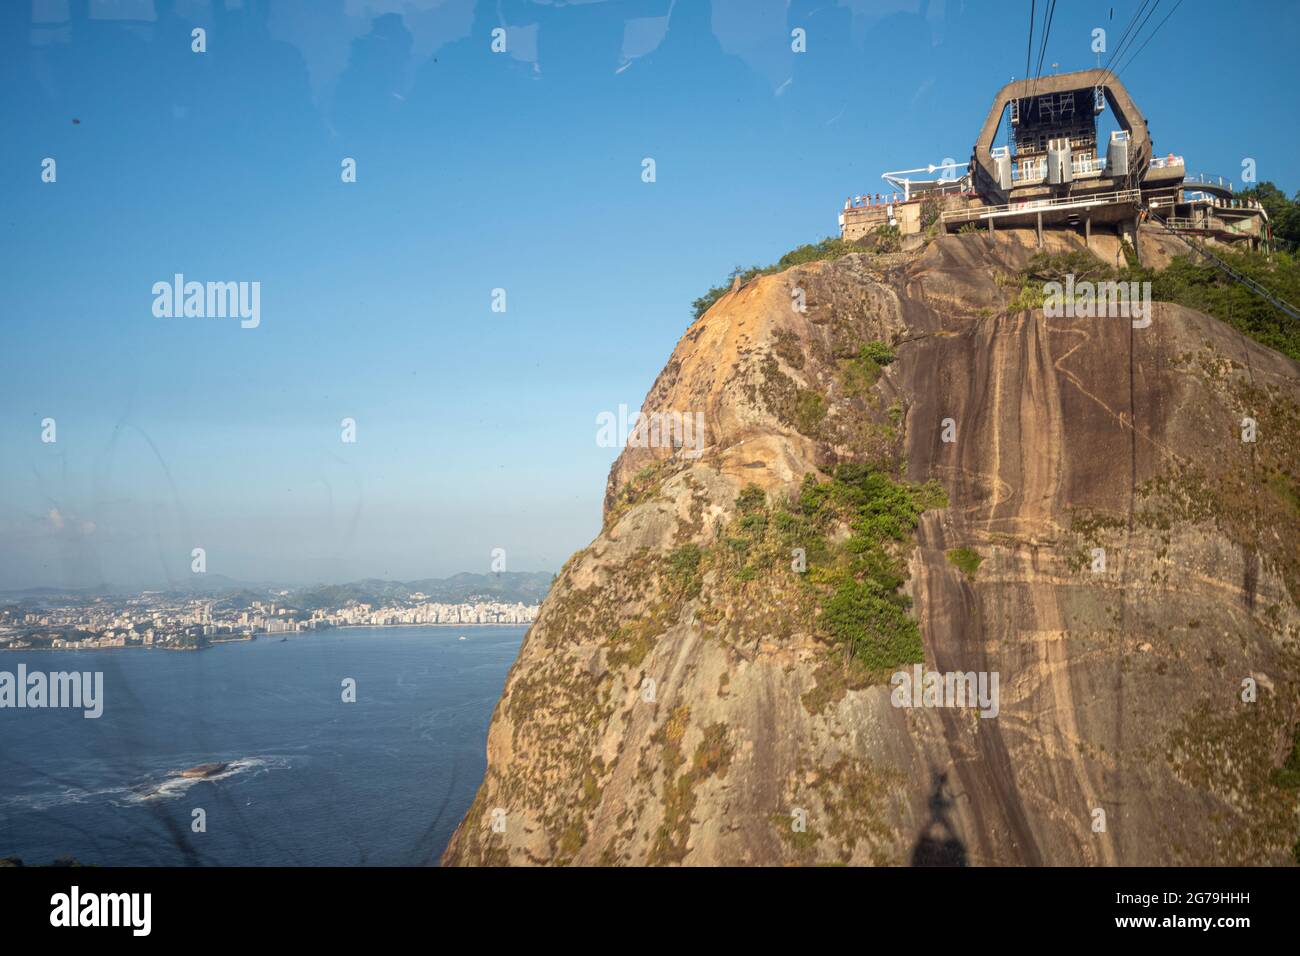 View of the Sugar loaf Mountain from inside the cable car that accesses the upper part of the hill. Stock Photo